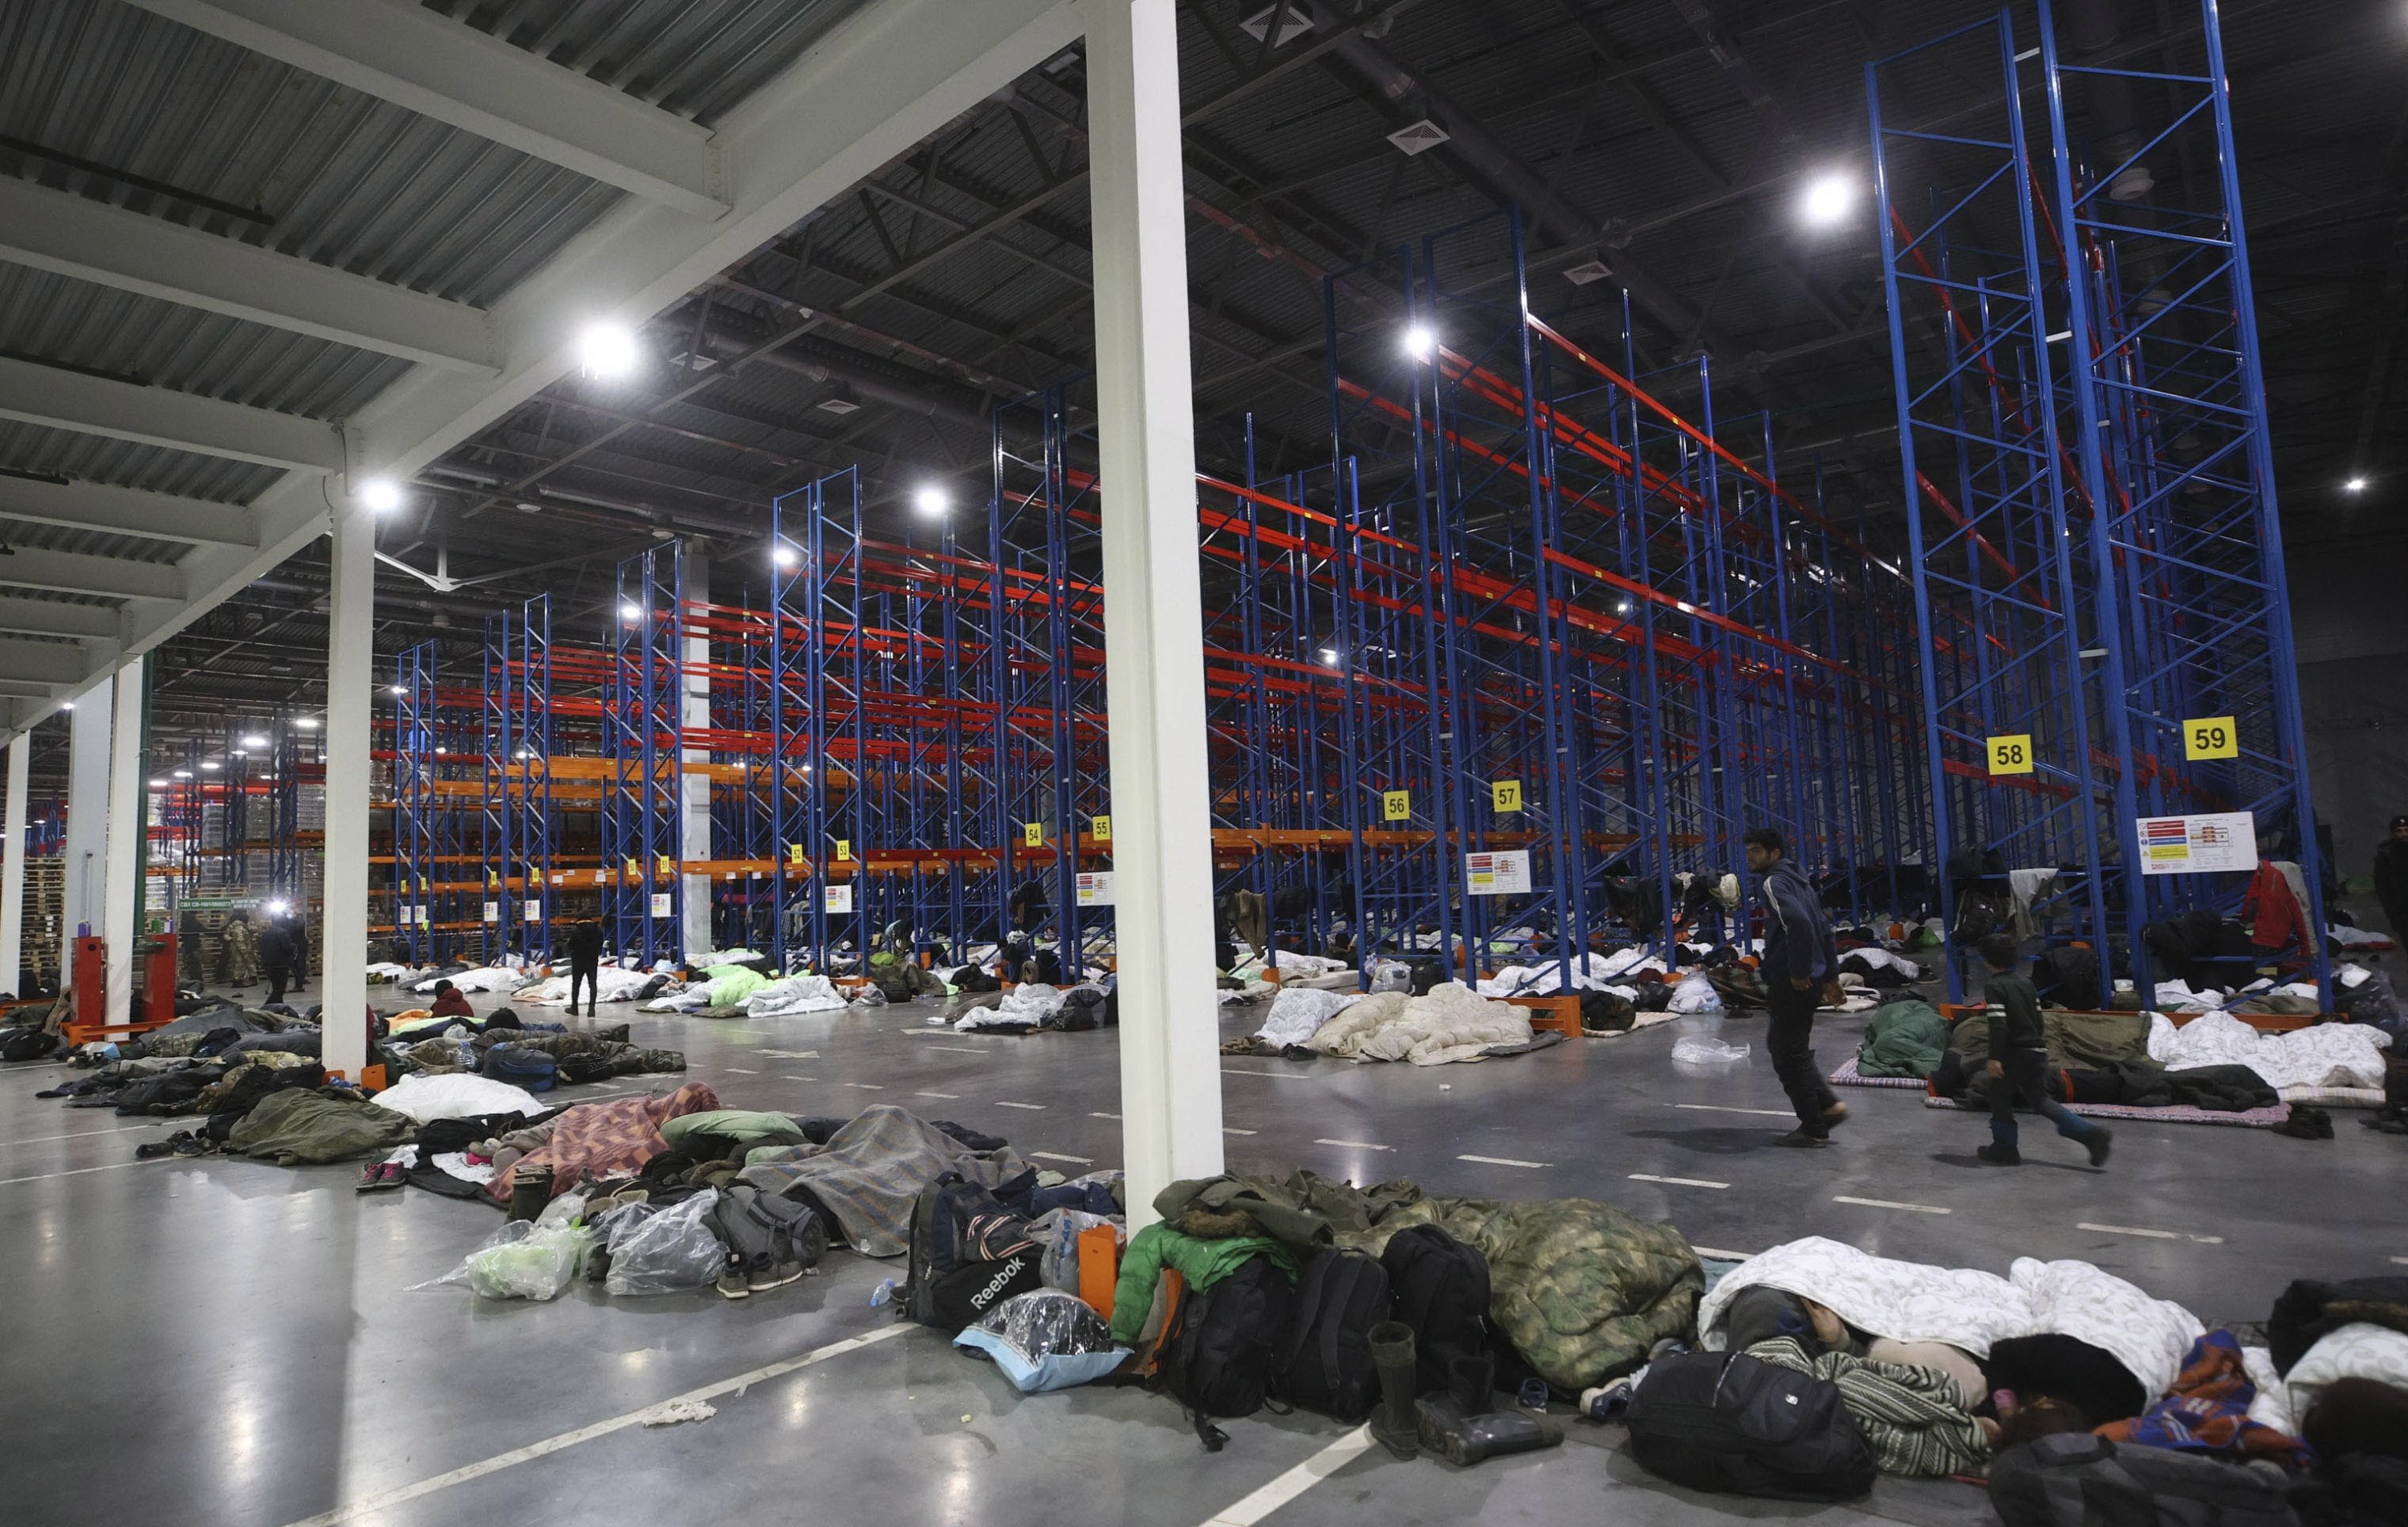 Migrants settle in a logistics center in the checkpoint "Kuznitsa" at the Belarus-Poland border near Grodno, Belarus, Nov. 17, 2021. (AP Photo)